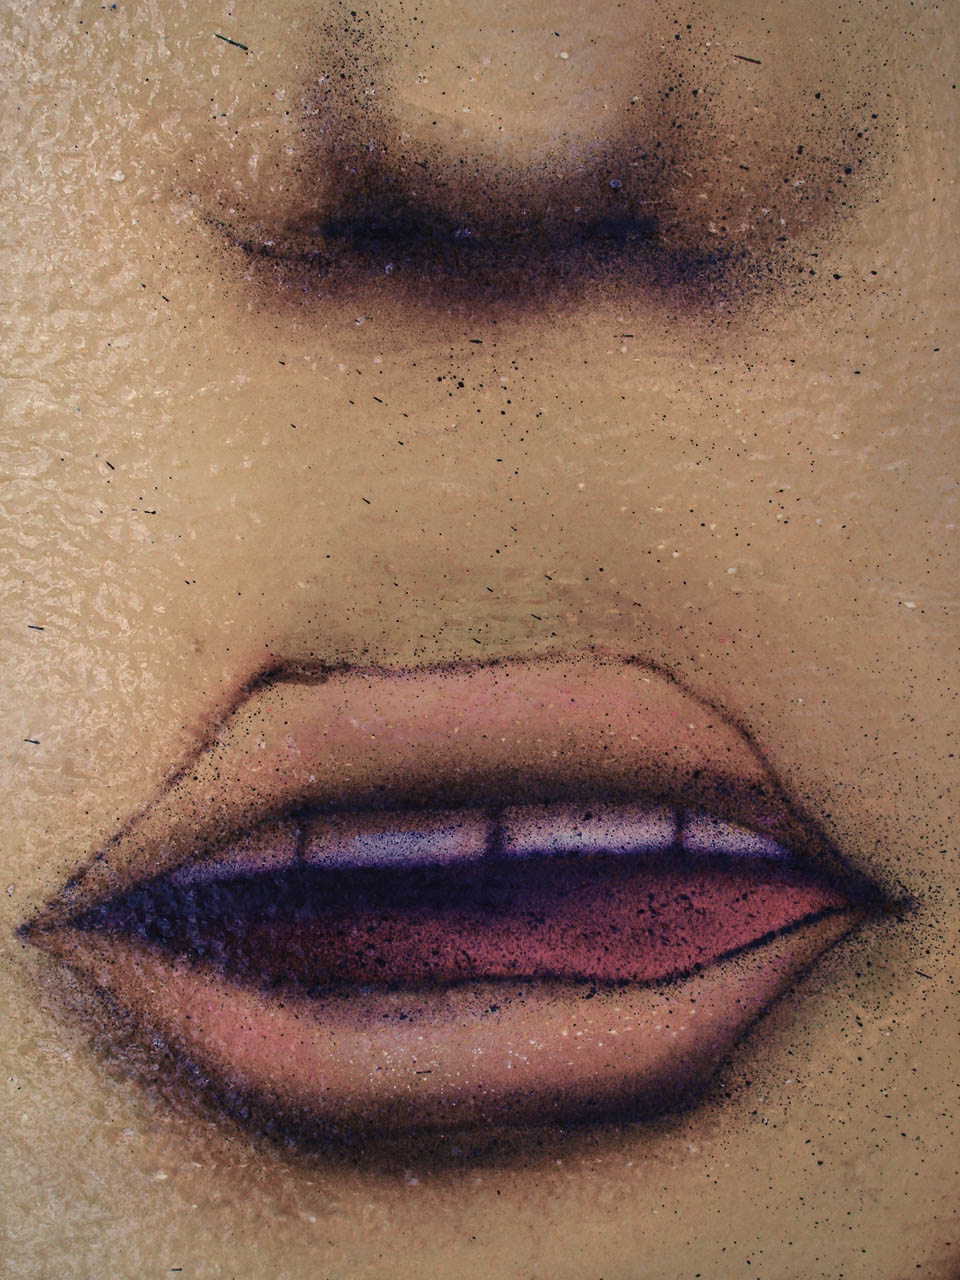 a woman's lips and mouth are covered in makeup